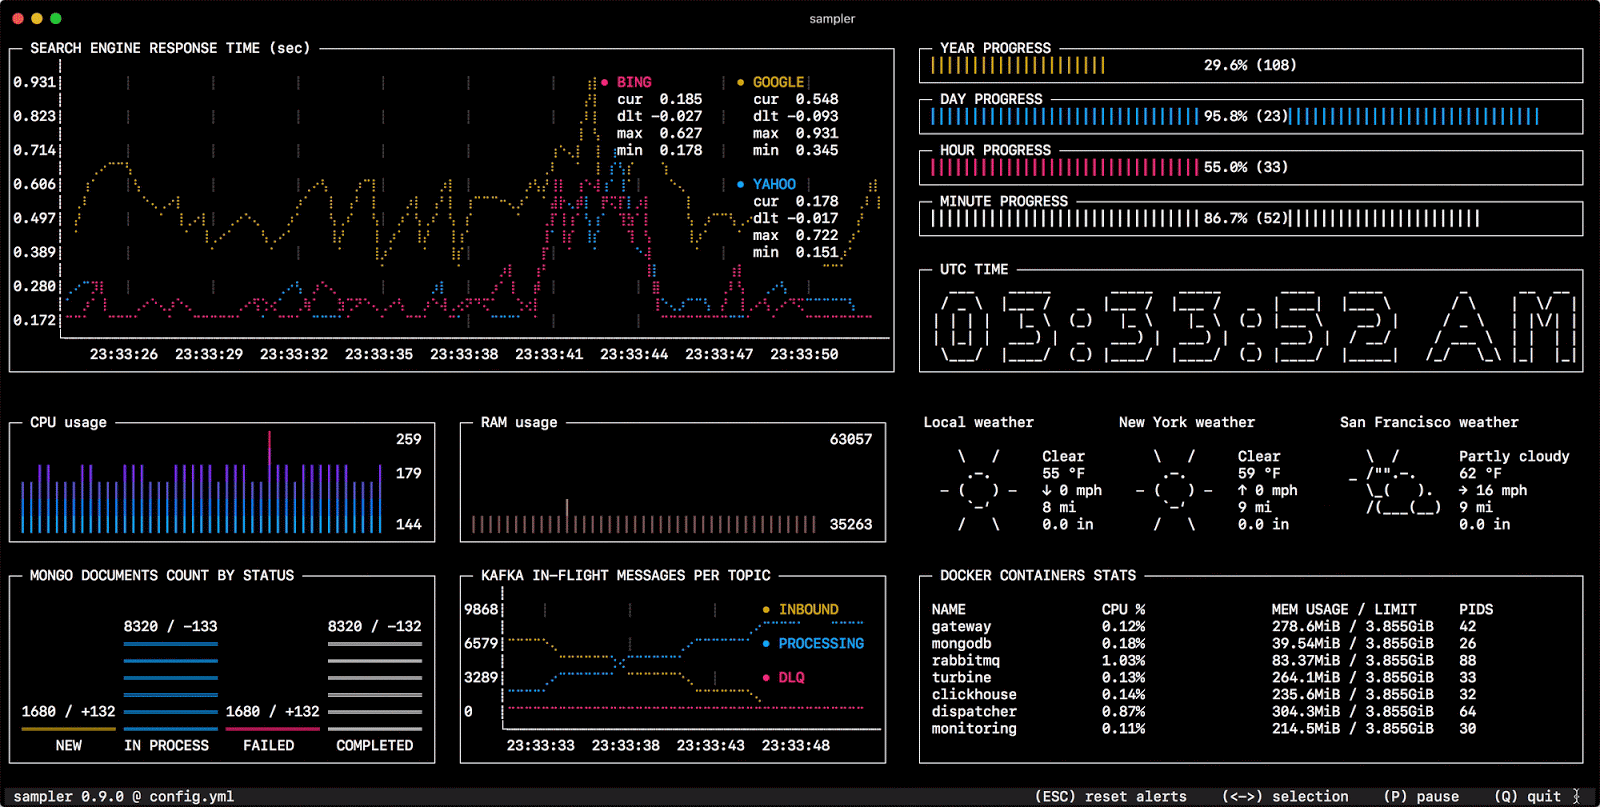 Sampler : A Tool For Shell Commands Execution, Visualization & Alerting